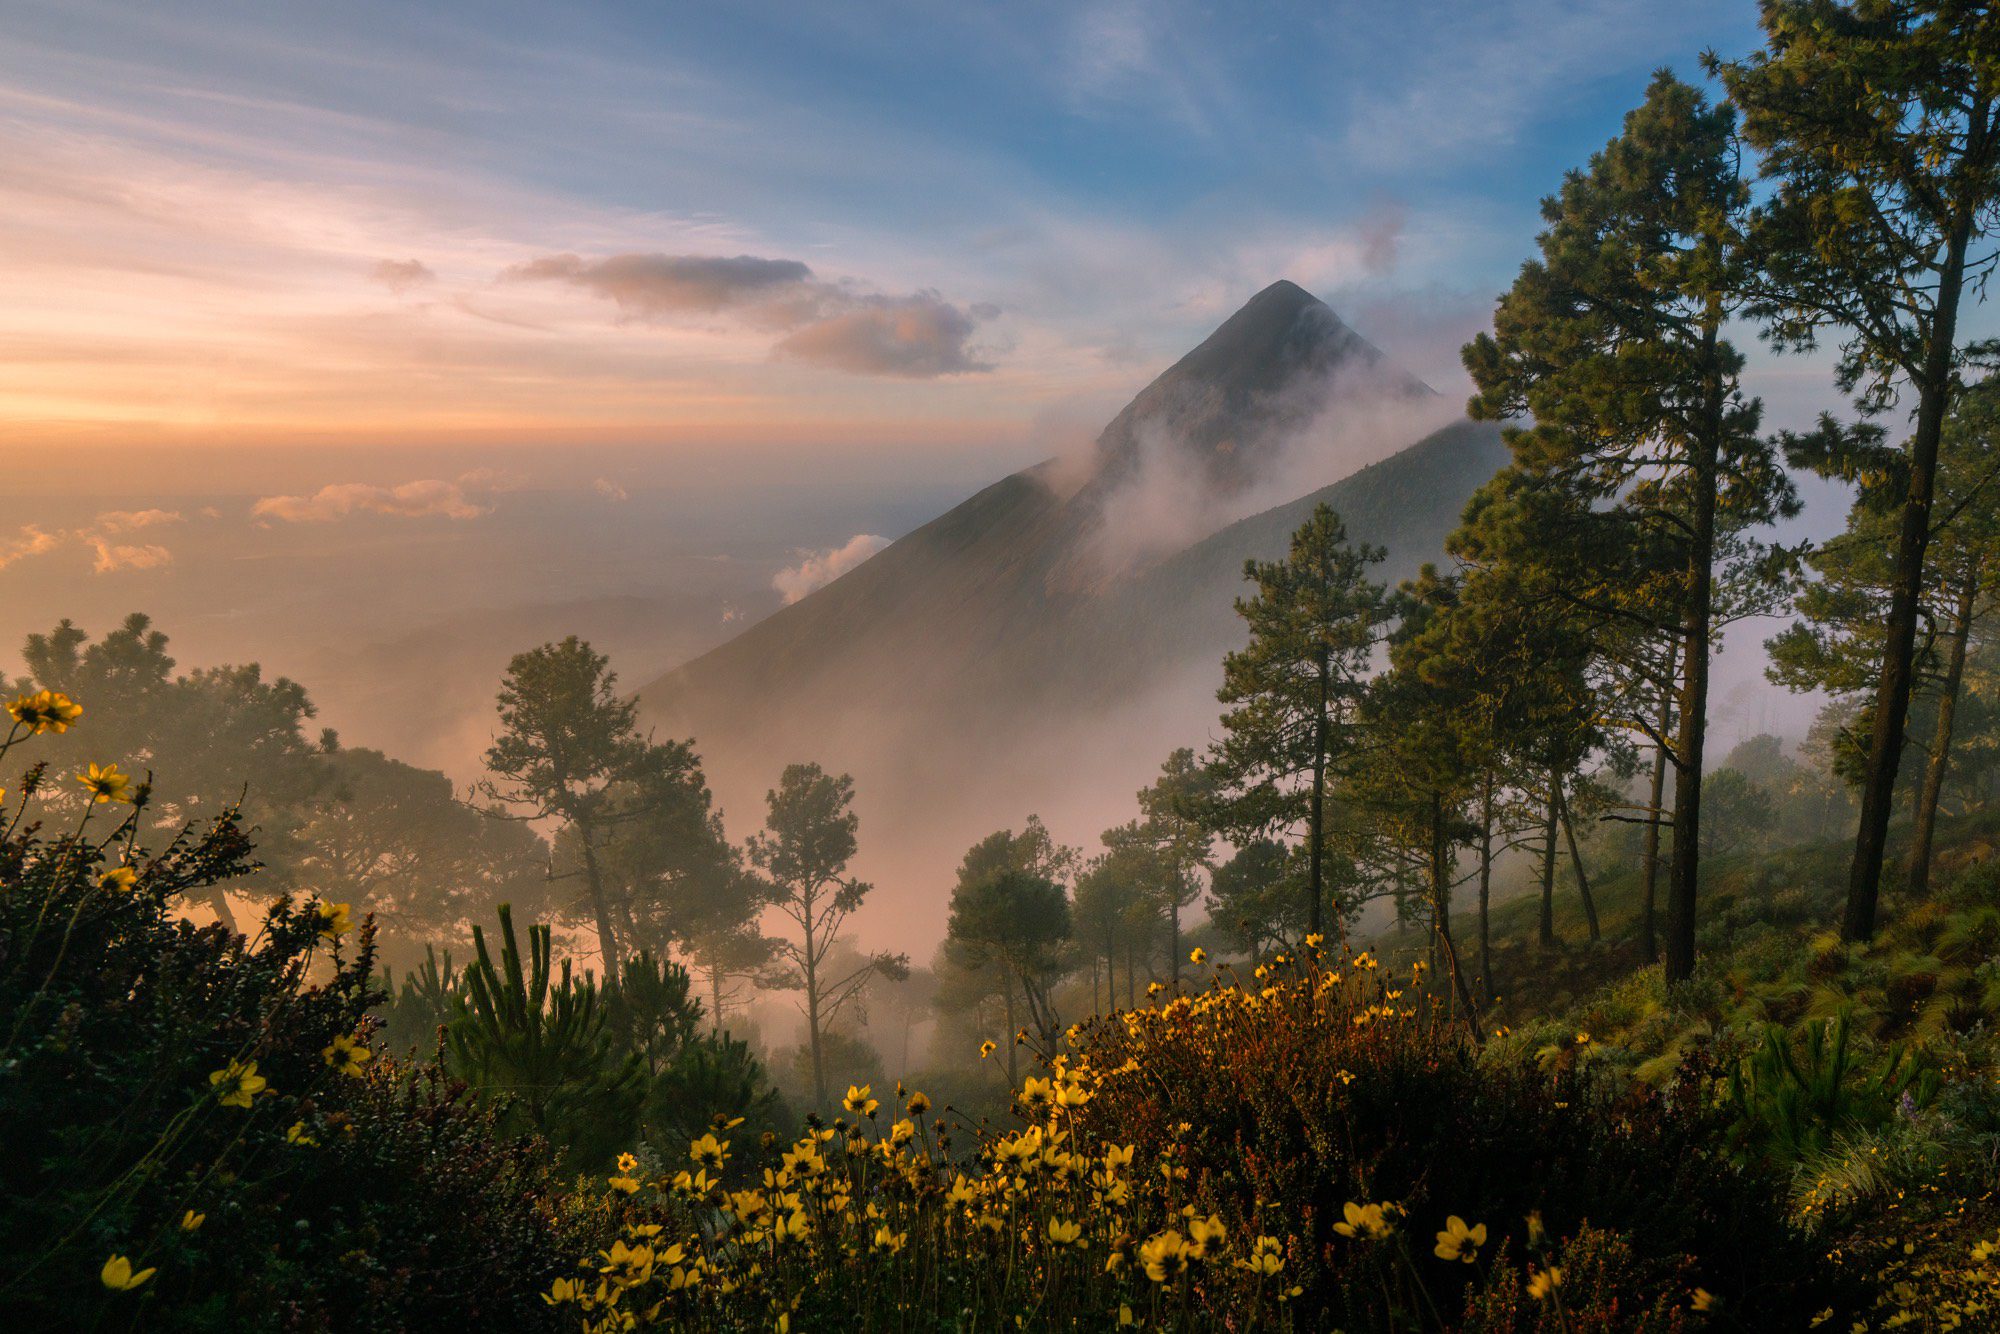 A tranquil landscape at sunrise or sunset with a prominent mountain peak, surrounded by forests, mist, and foreground yellow wildflowers.